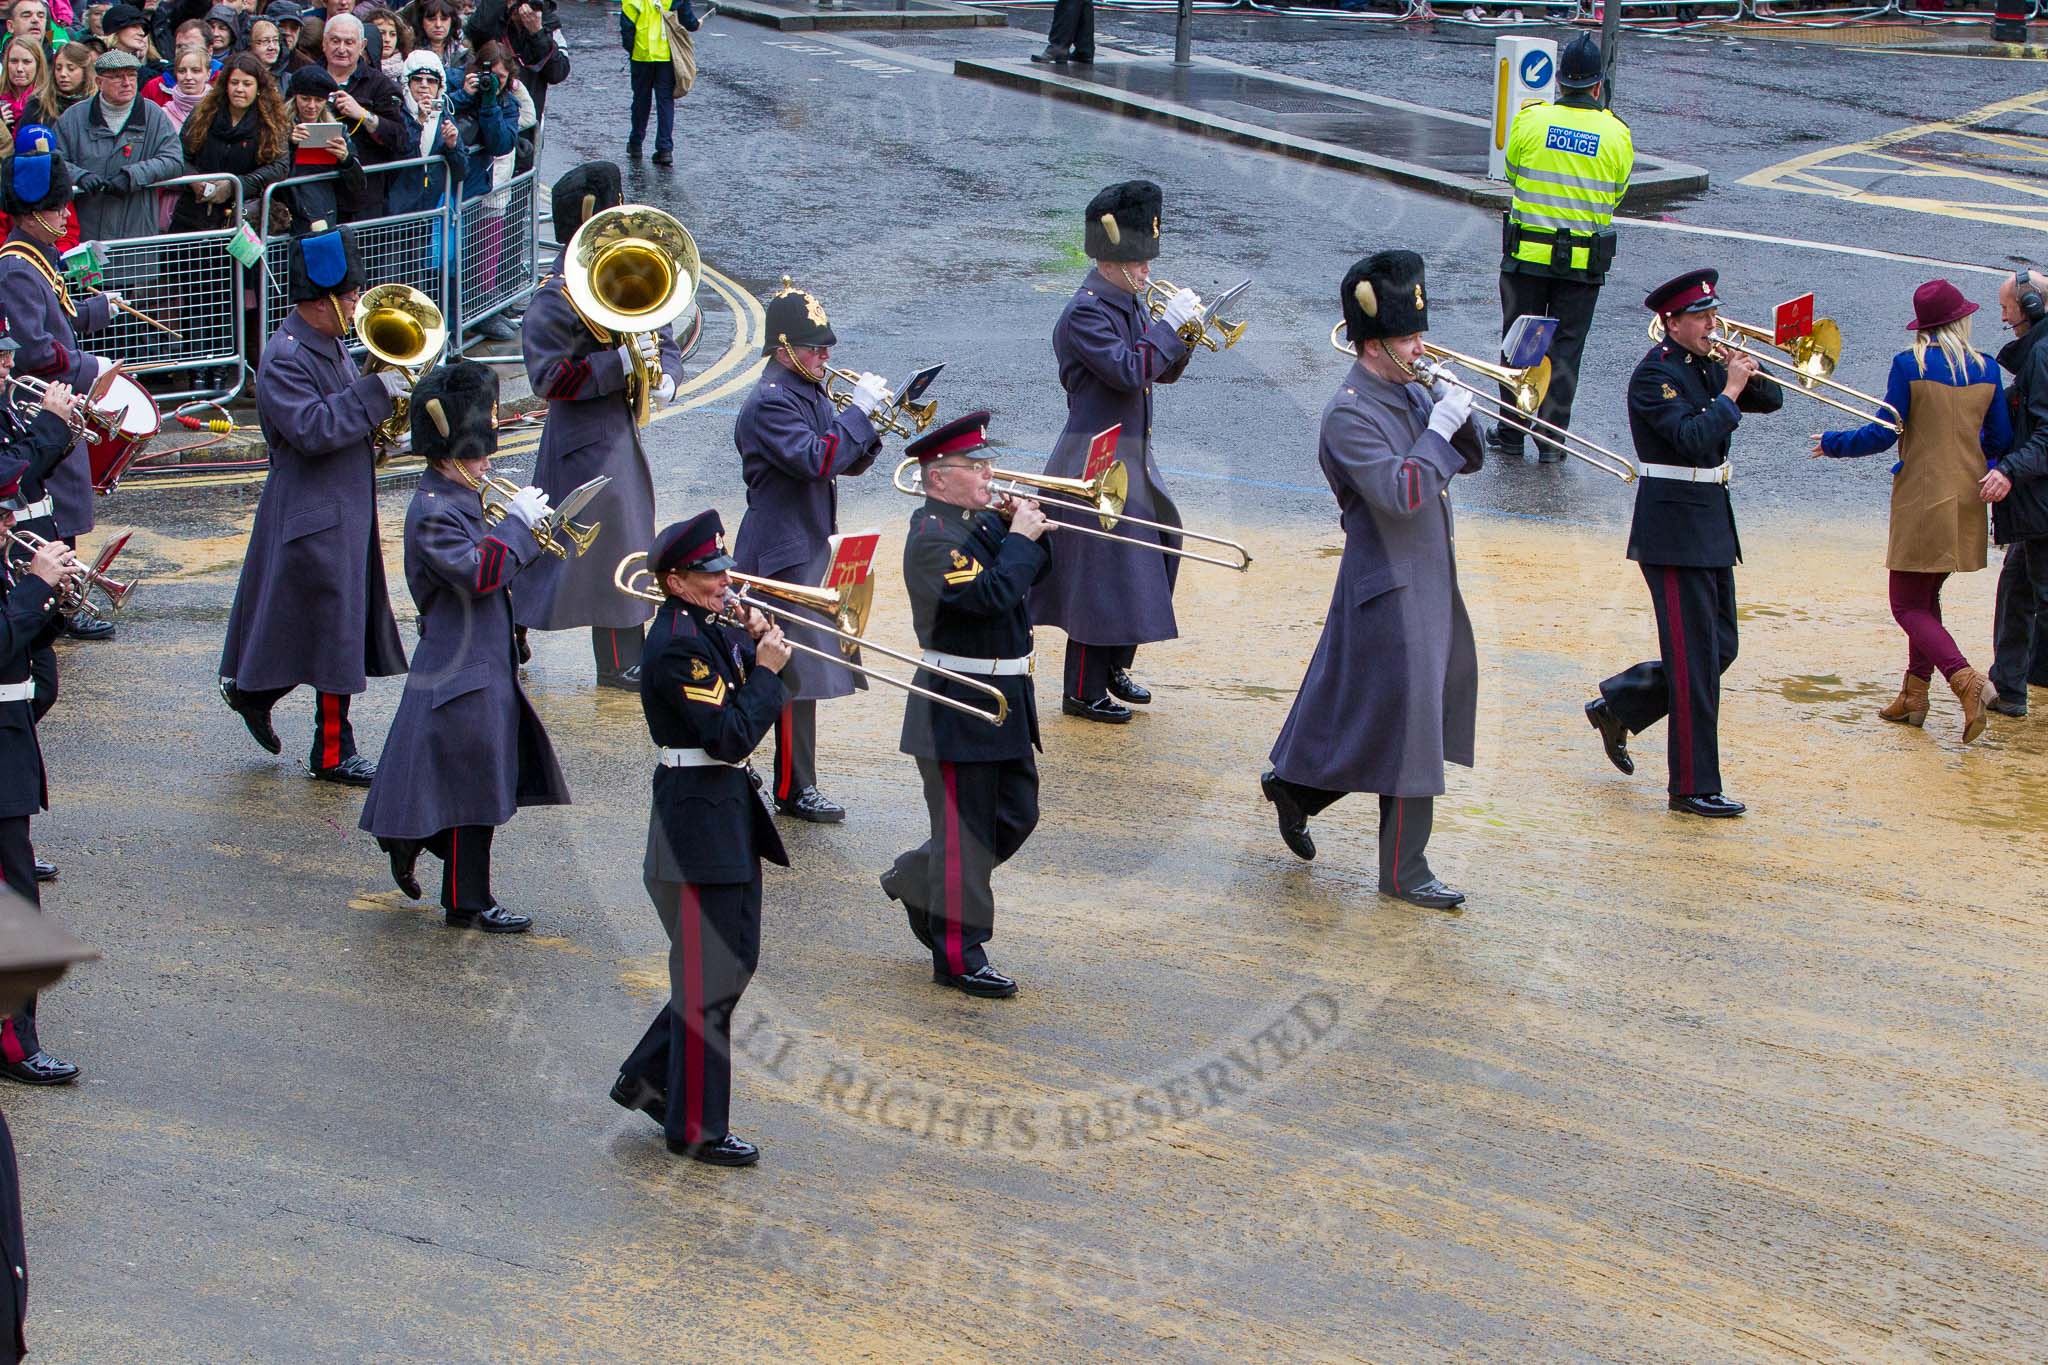 Lord Mayor's Show 2012: Entry 61 - Army Medical Services Band (V)..
Press stand opposite Mansion House, City of London,
London,
Greater London,
United Kingdom,
on 10 November 2012 at 11:27, image #798